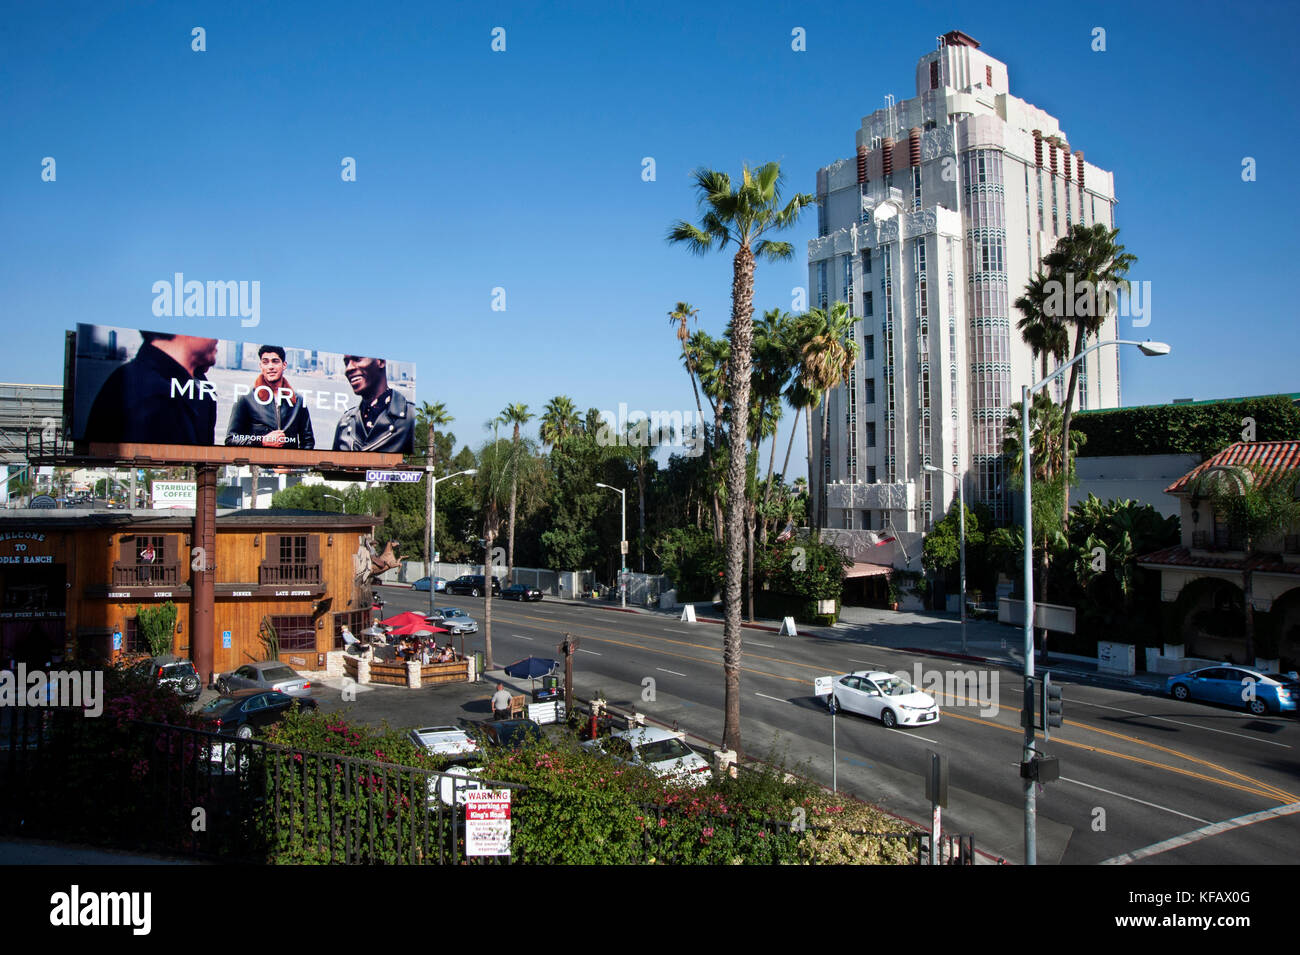 Sunset Tower Hotel on the Sunset Strip in Los Angeles, CA Stock Photo